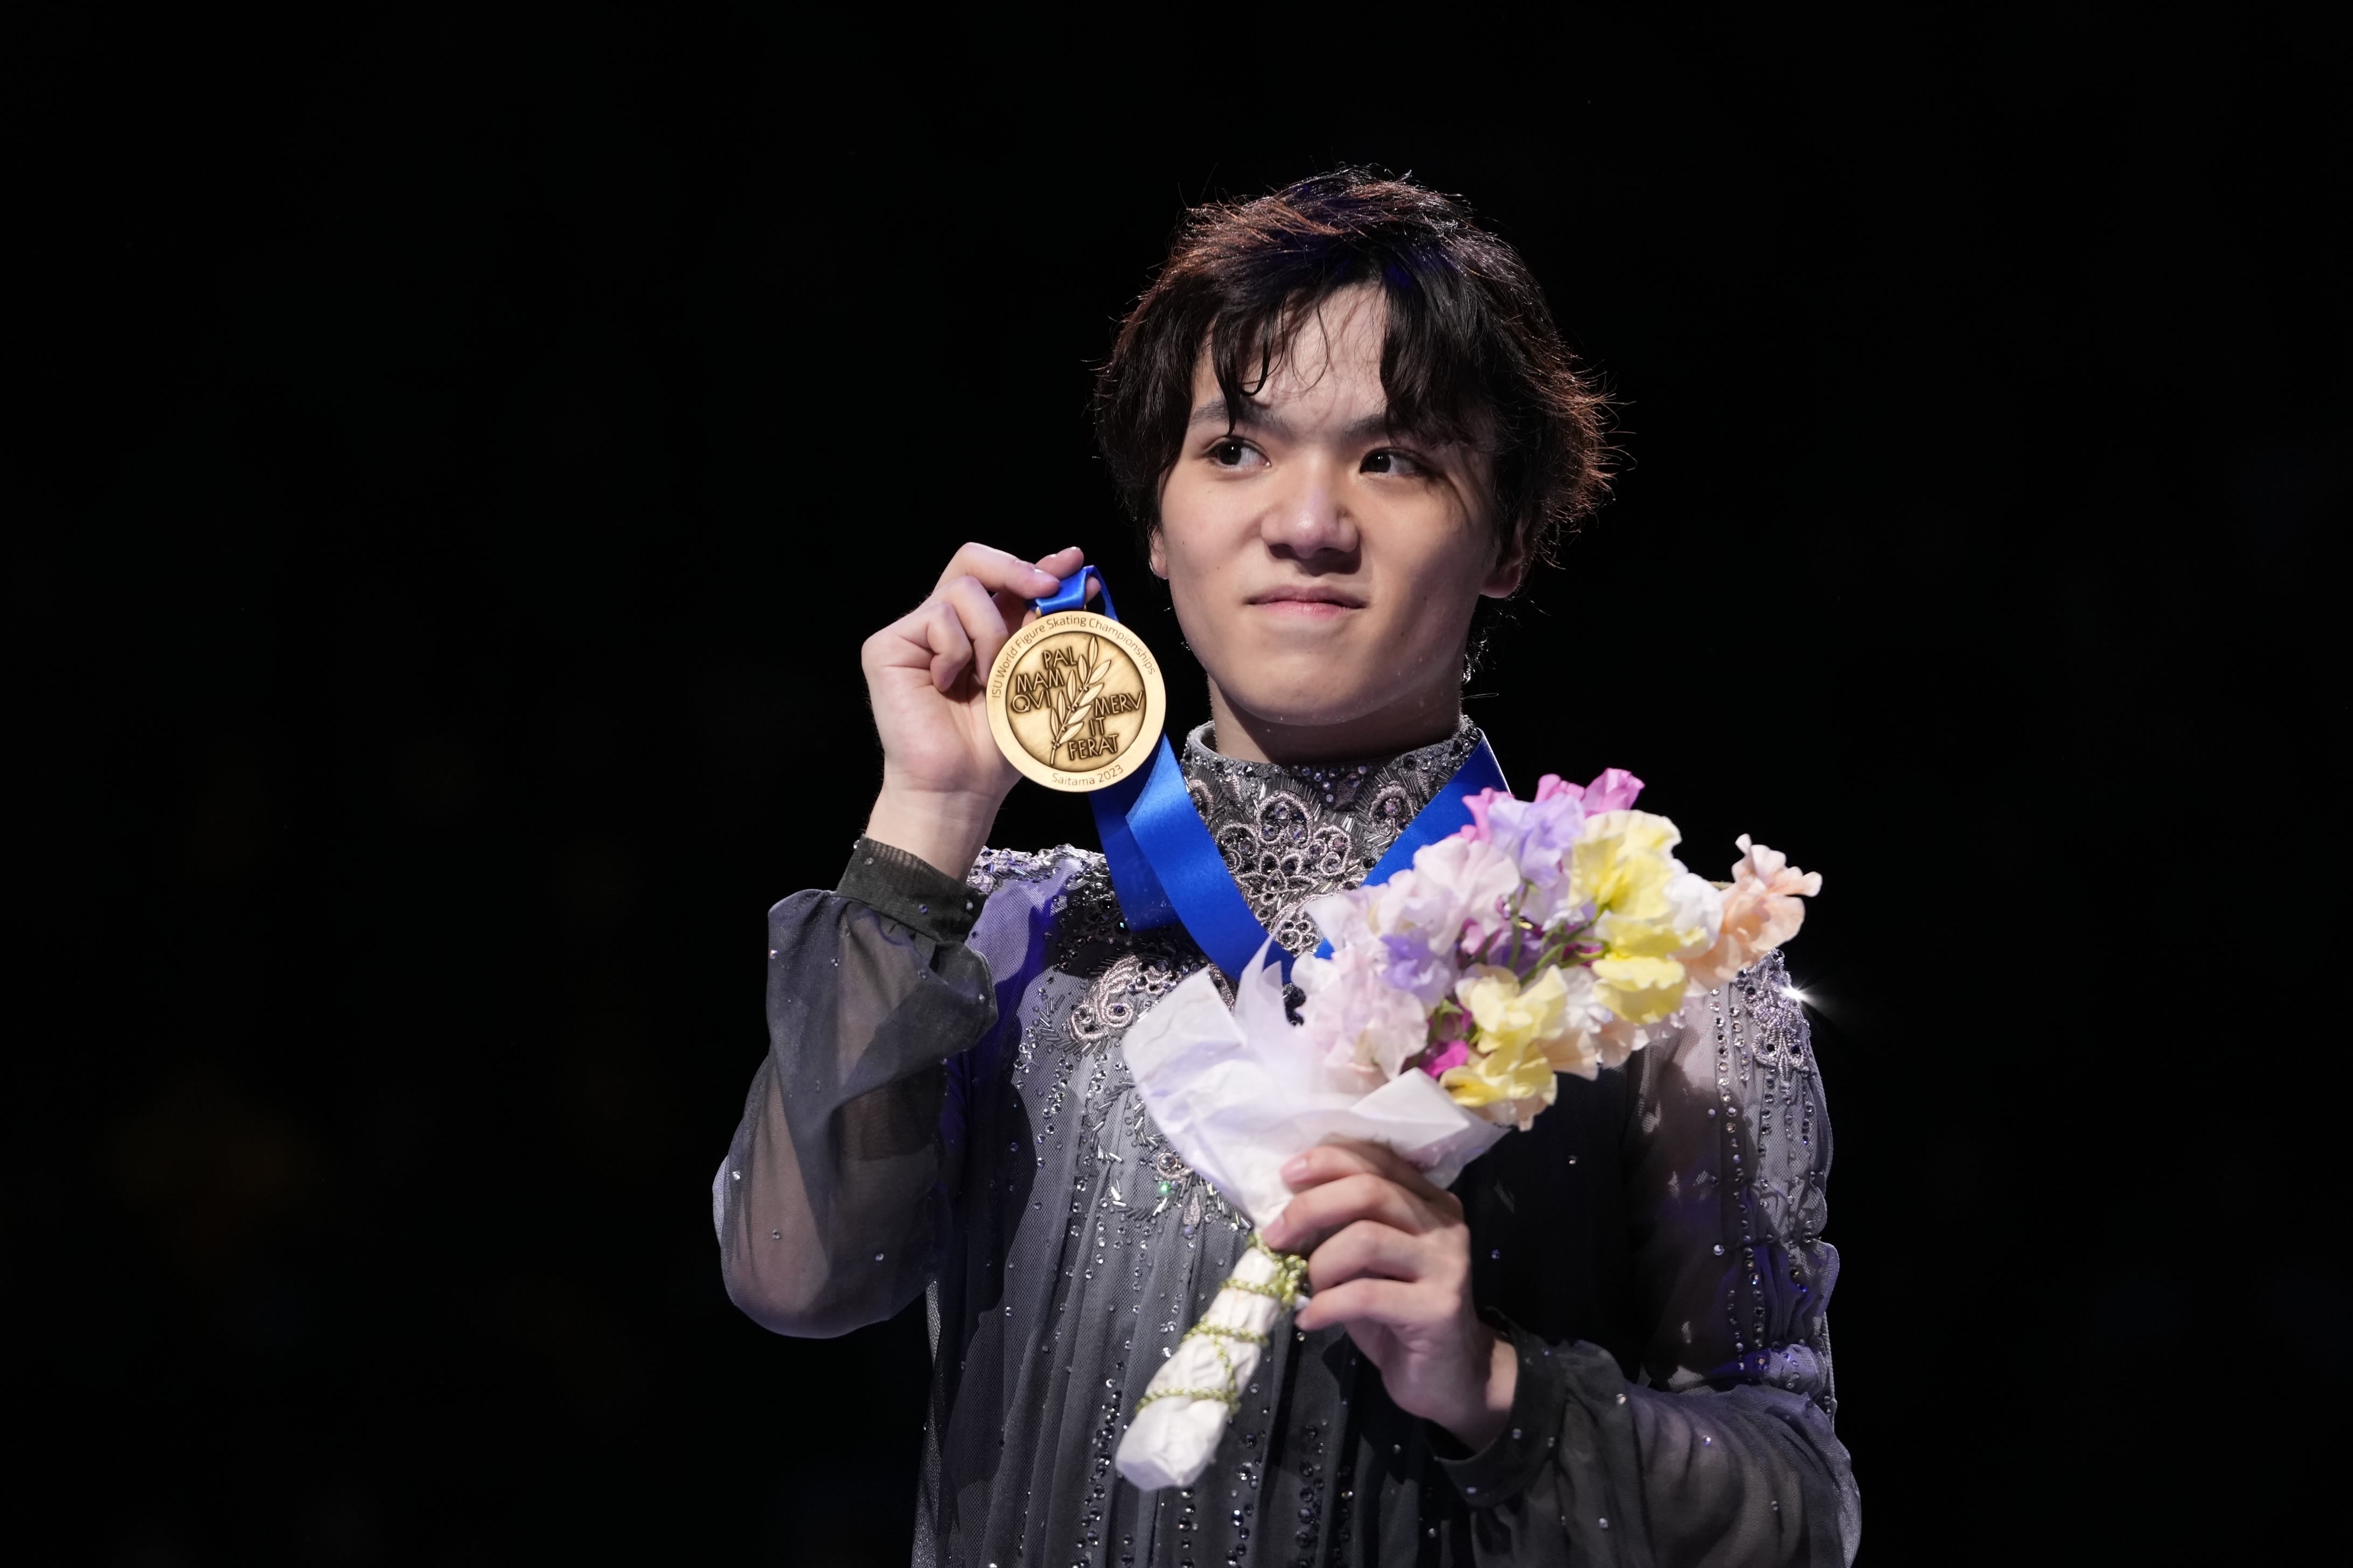 Japan's Olympic medalist and world champion Shoma Uno says he's retiring from figure skating